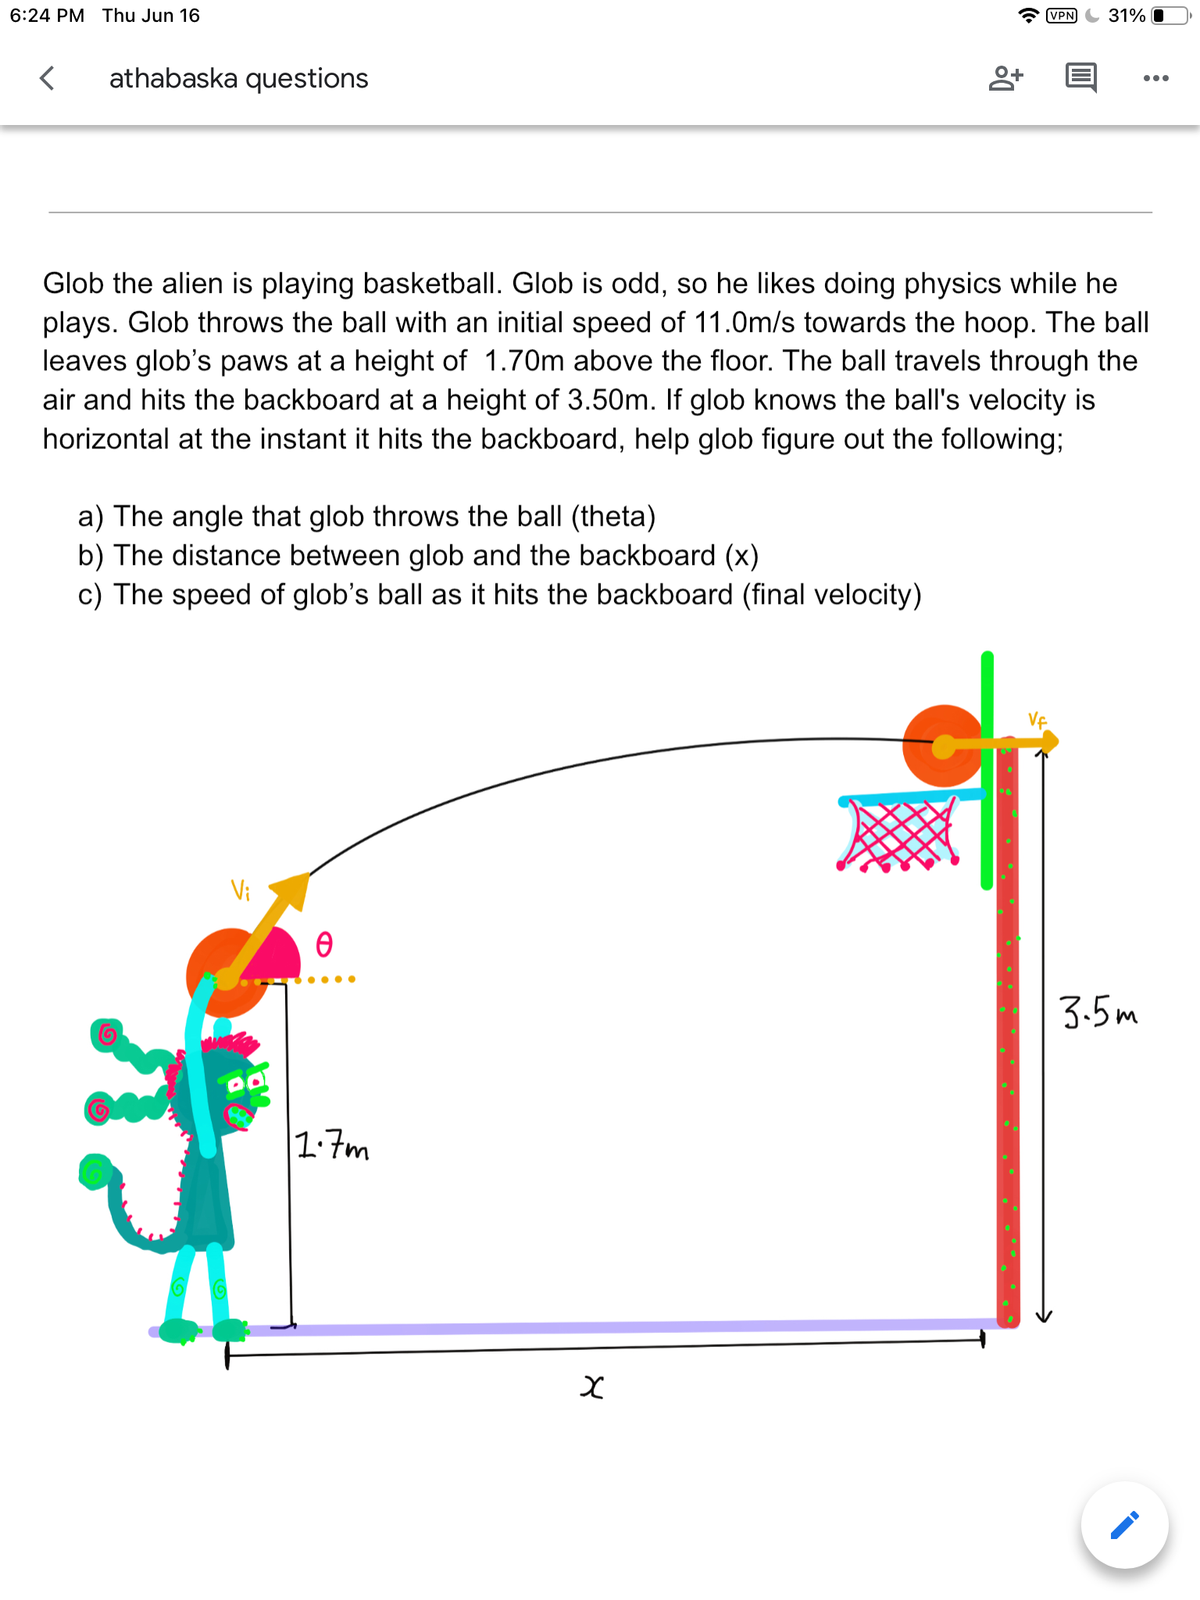 6:24 PM Thu Jun 16
< athabaska questions
8+
Glob the alien is playing basketball. Glob is odd, so he likes doing physics while he
plays. Glob throws the ball with an initial speed of 11.0m/s towards the hoop. The ball
leaves glob's paws at a height of 1.70m above the floor. The ball travels through the
air and hits the backboard at a height of 3.50m. If glob knows the ball's velocity is
horizontal at the instant it hits the backboard, help glob figure out the following;
a) The angle that glob throws the ball (theta)
b) The distance between glob and the backboard (x)
c) The speed of glob's ball as it hits the backboard (final velocity)
Ꮎ
●●●●
1.7m
VPN 31%
x
3.5m
: